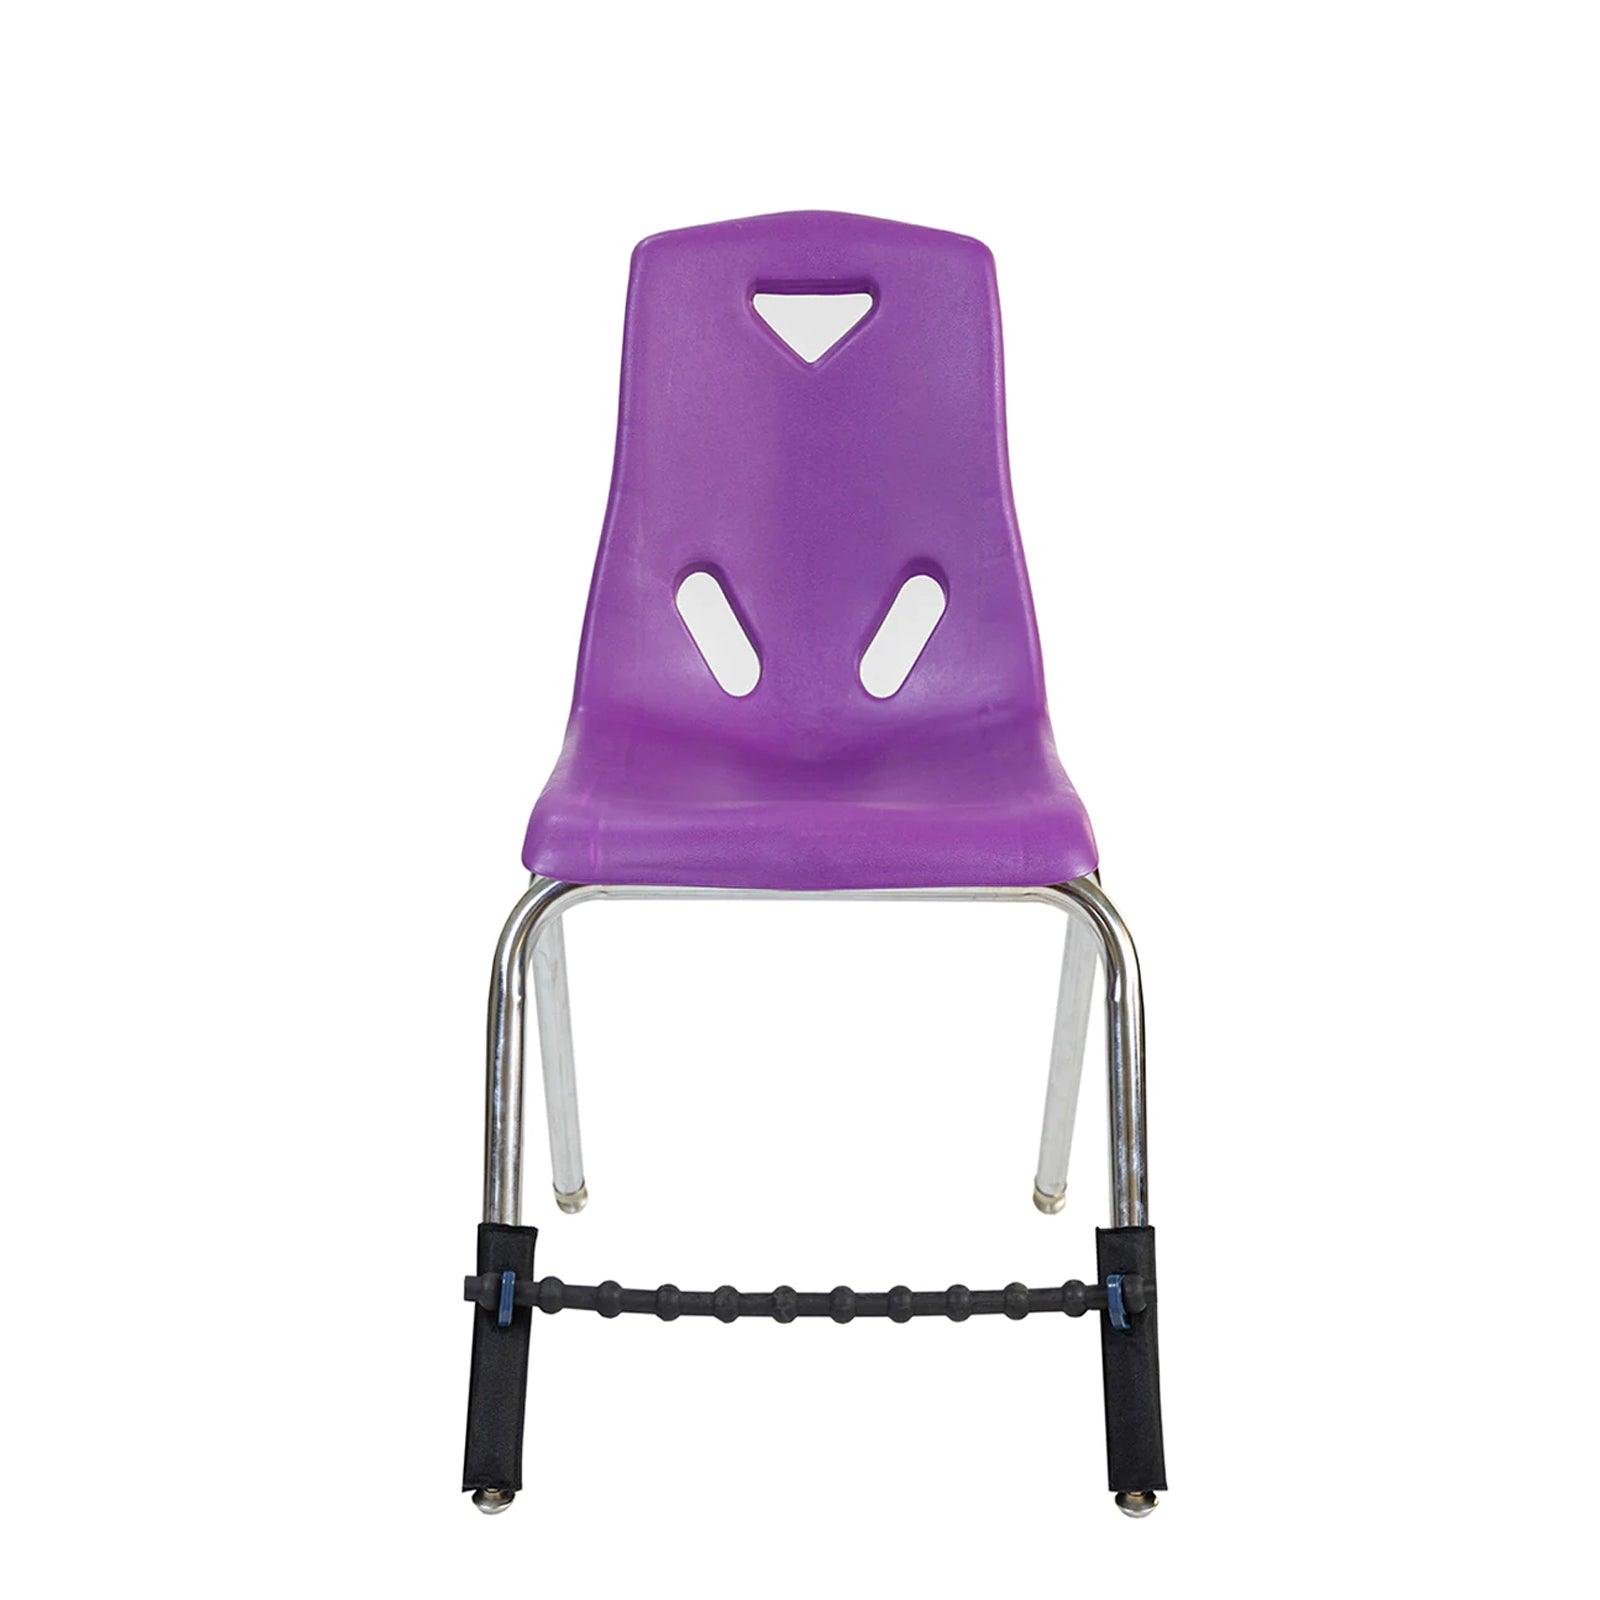 Universal Chair Band for Home & School Chairs - Loomini